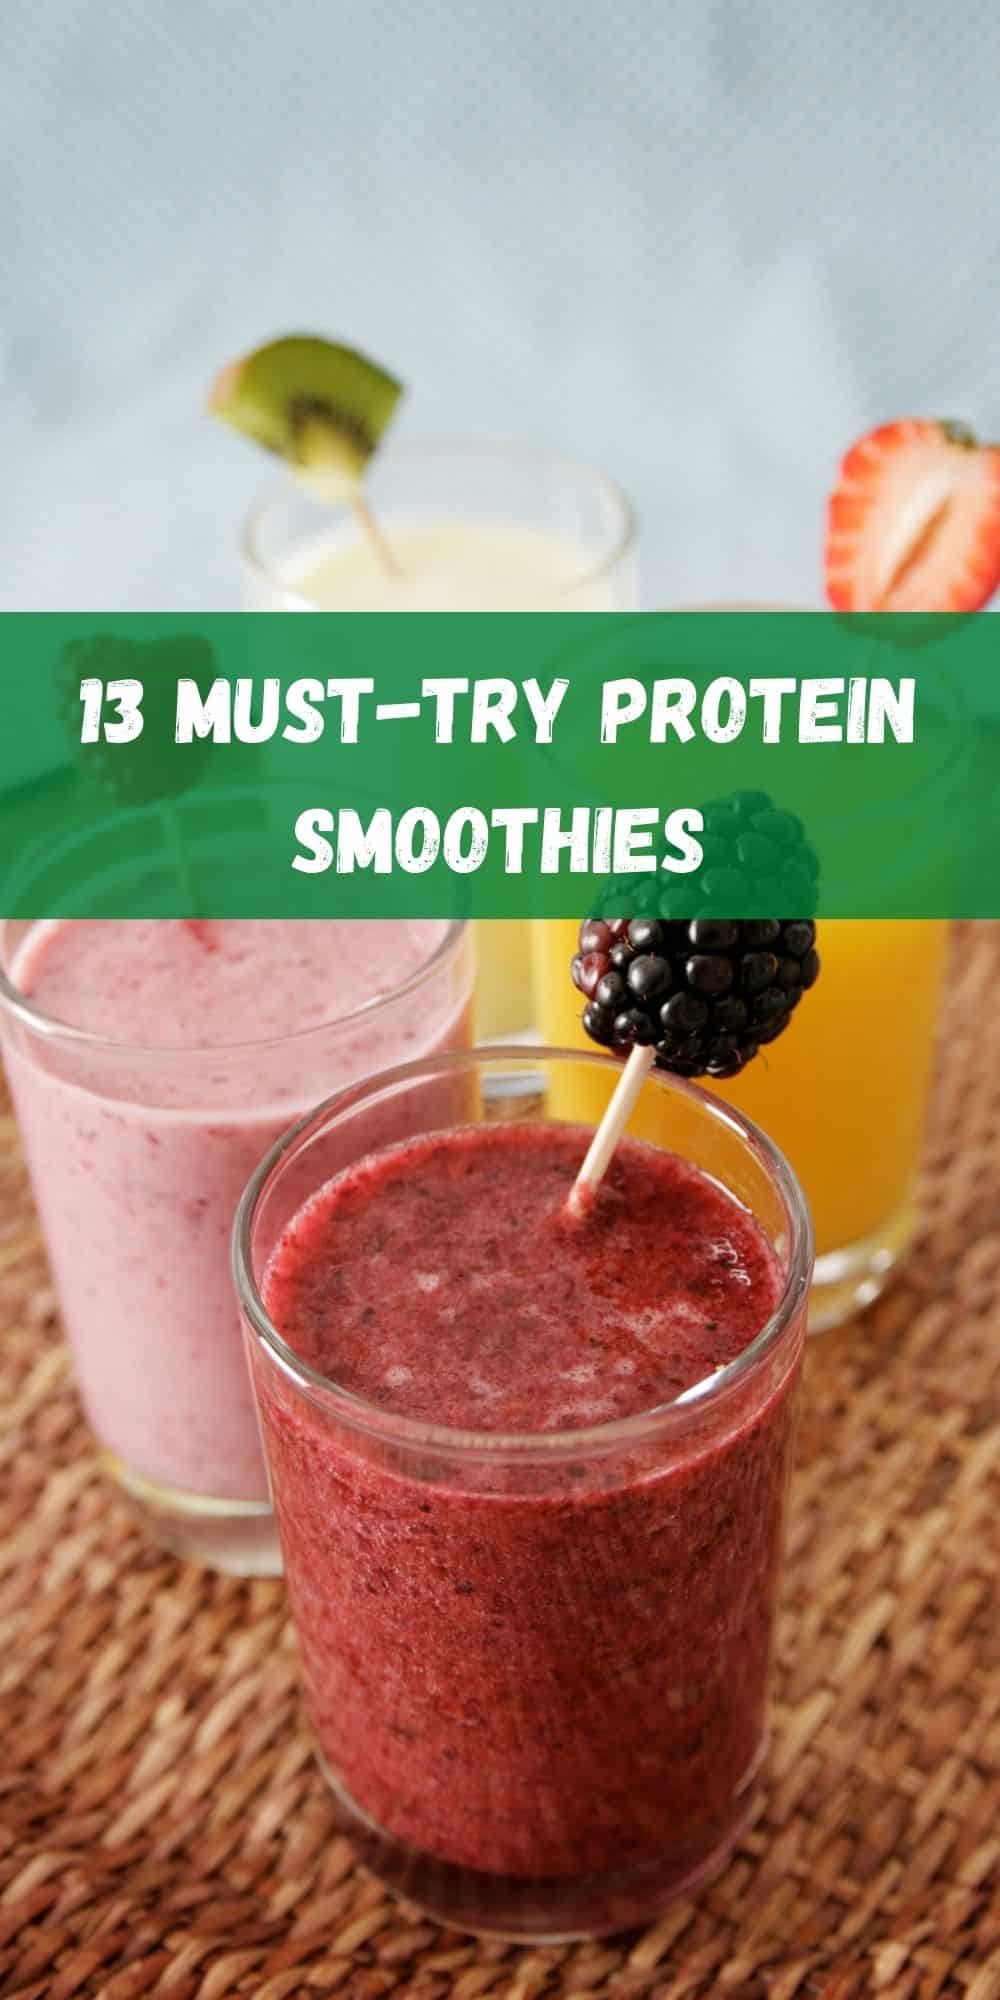 Recipes for protein smoothies